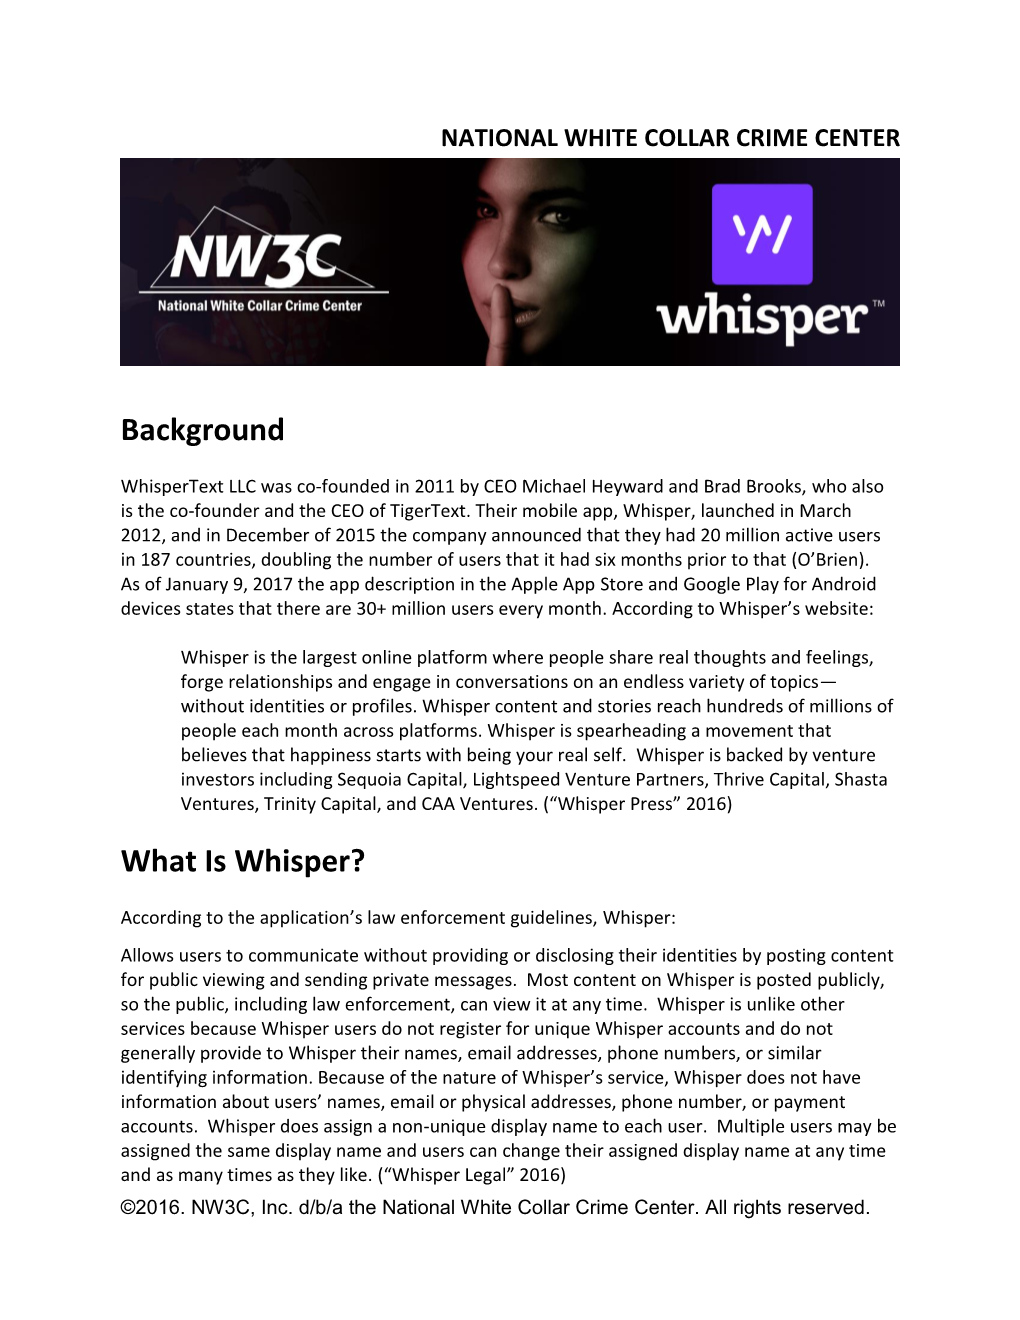 Whispertext LLC Was Co-Founded in 2011 by CEO Michael Heyward and Brad Brooks, Who Also Is the Co-Founder and the CEO of Tigertext